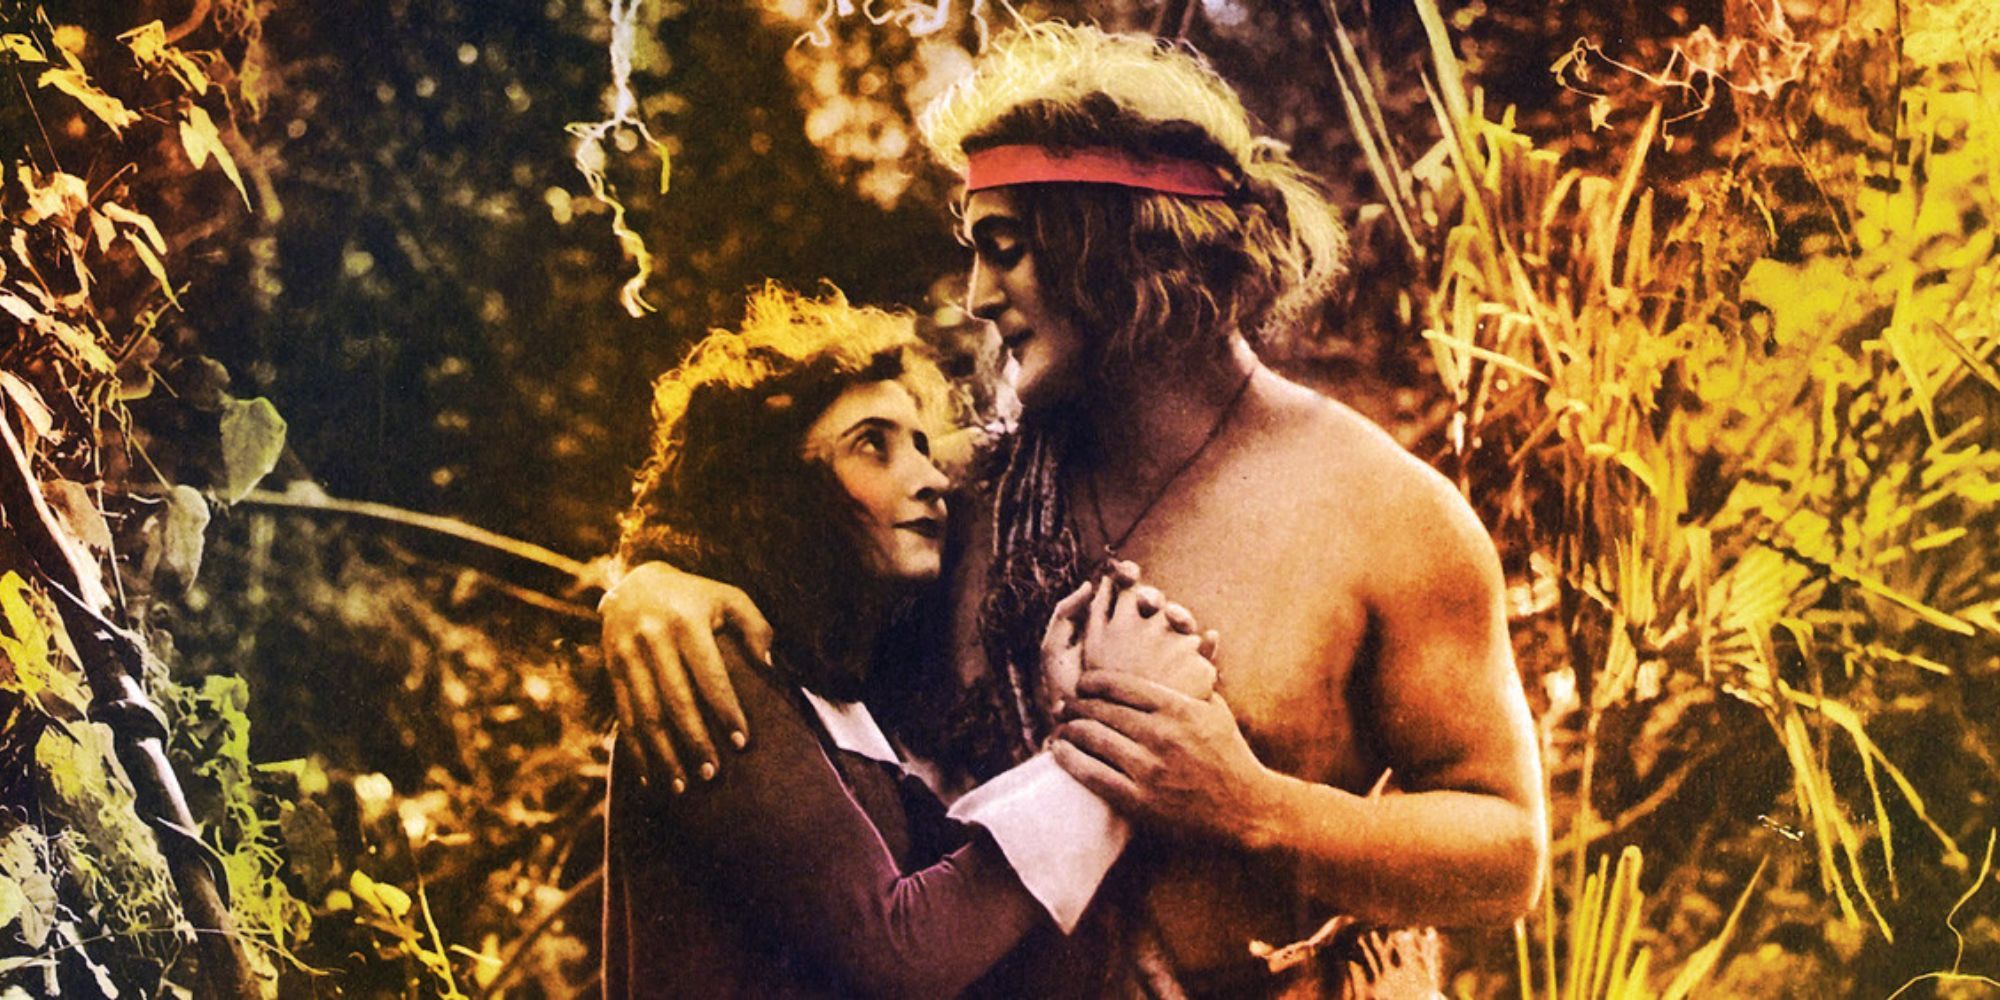 Tarzan holding hands with Jane in the 1918 film